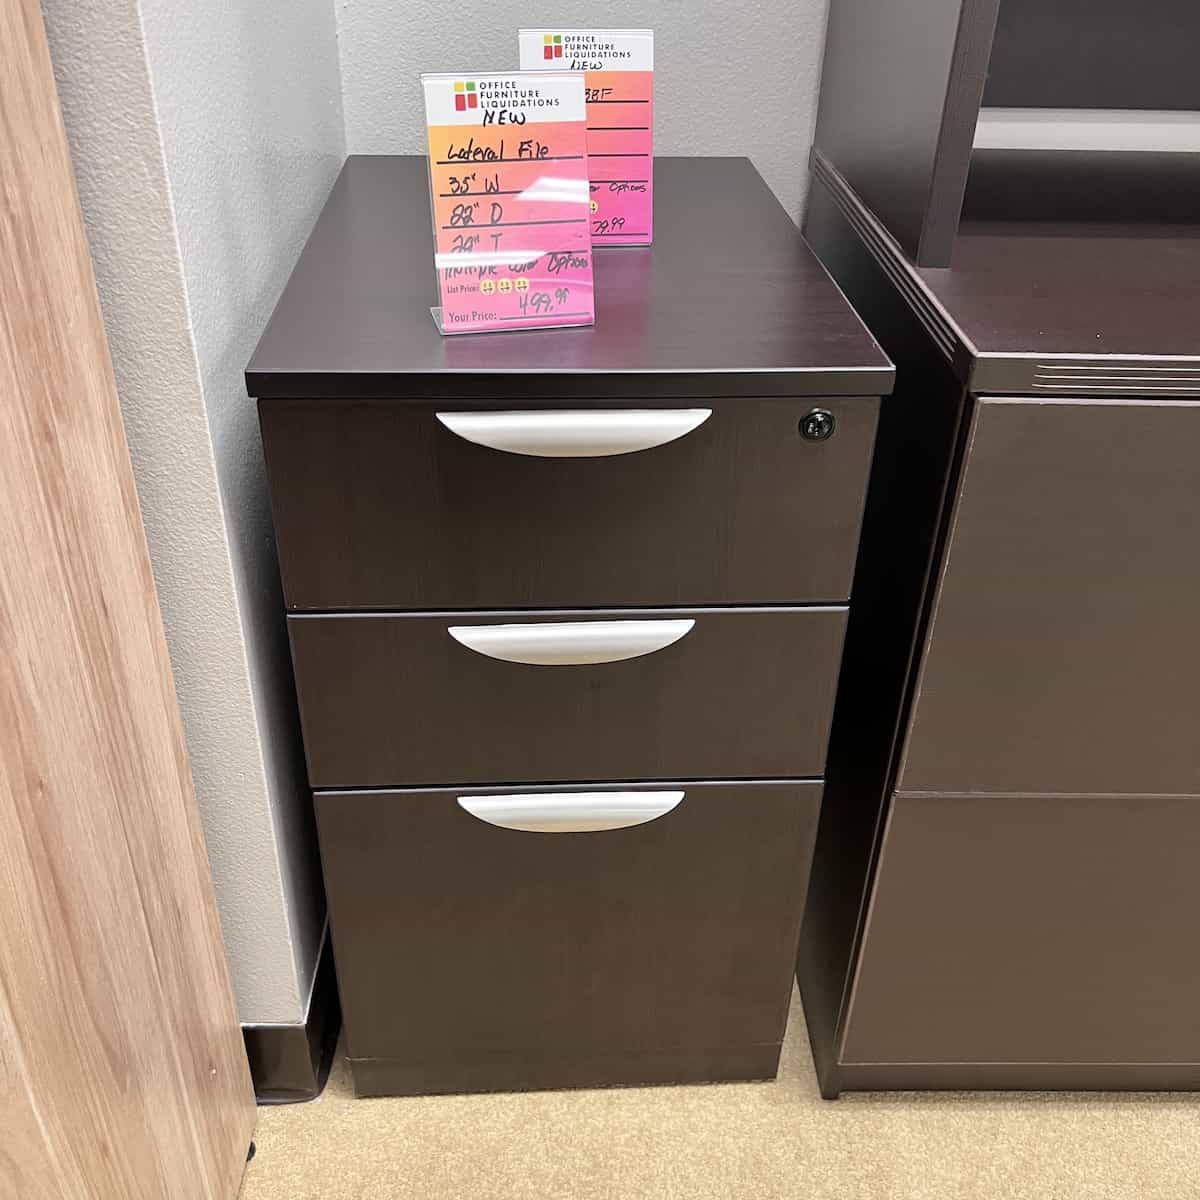 file cabinet with two small drawers on top, and file drawer on bottom